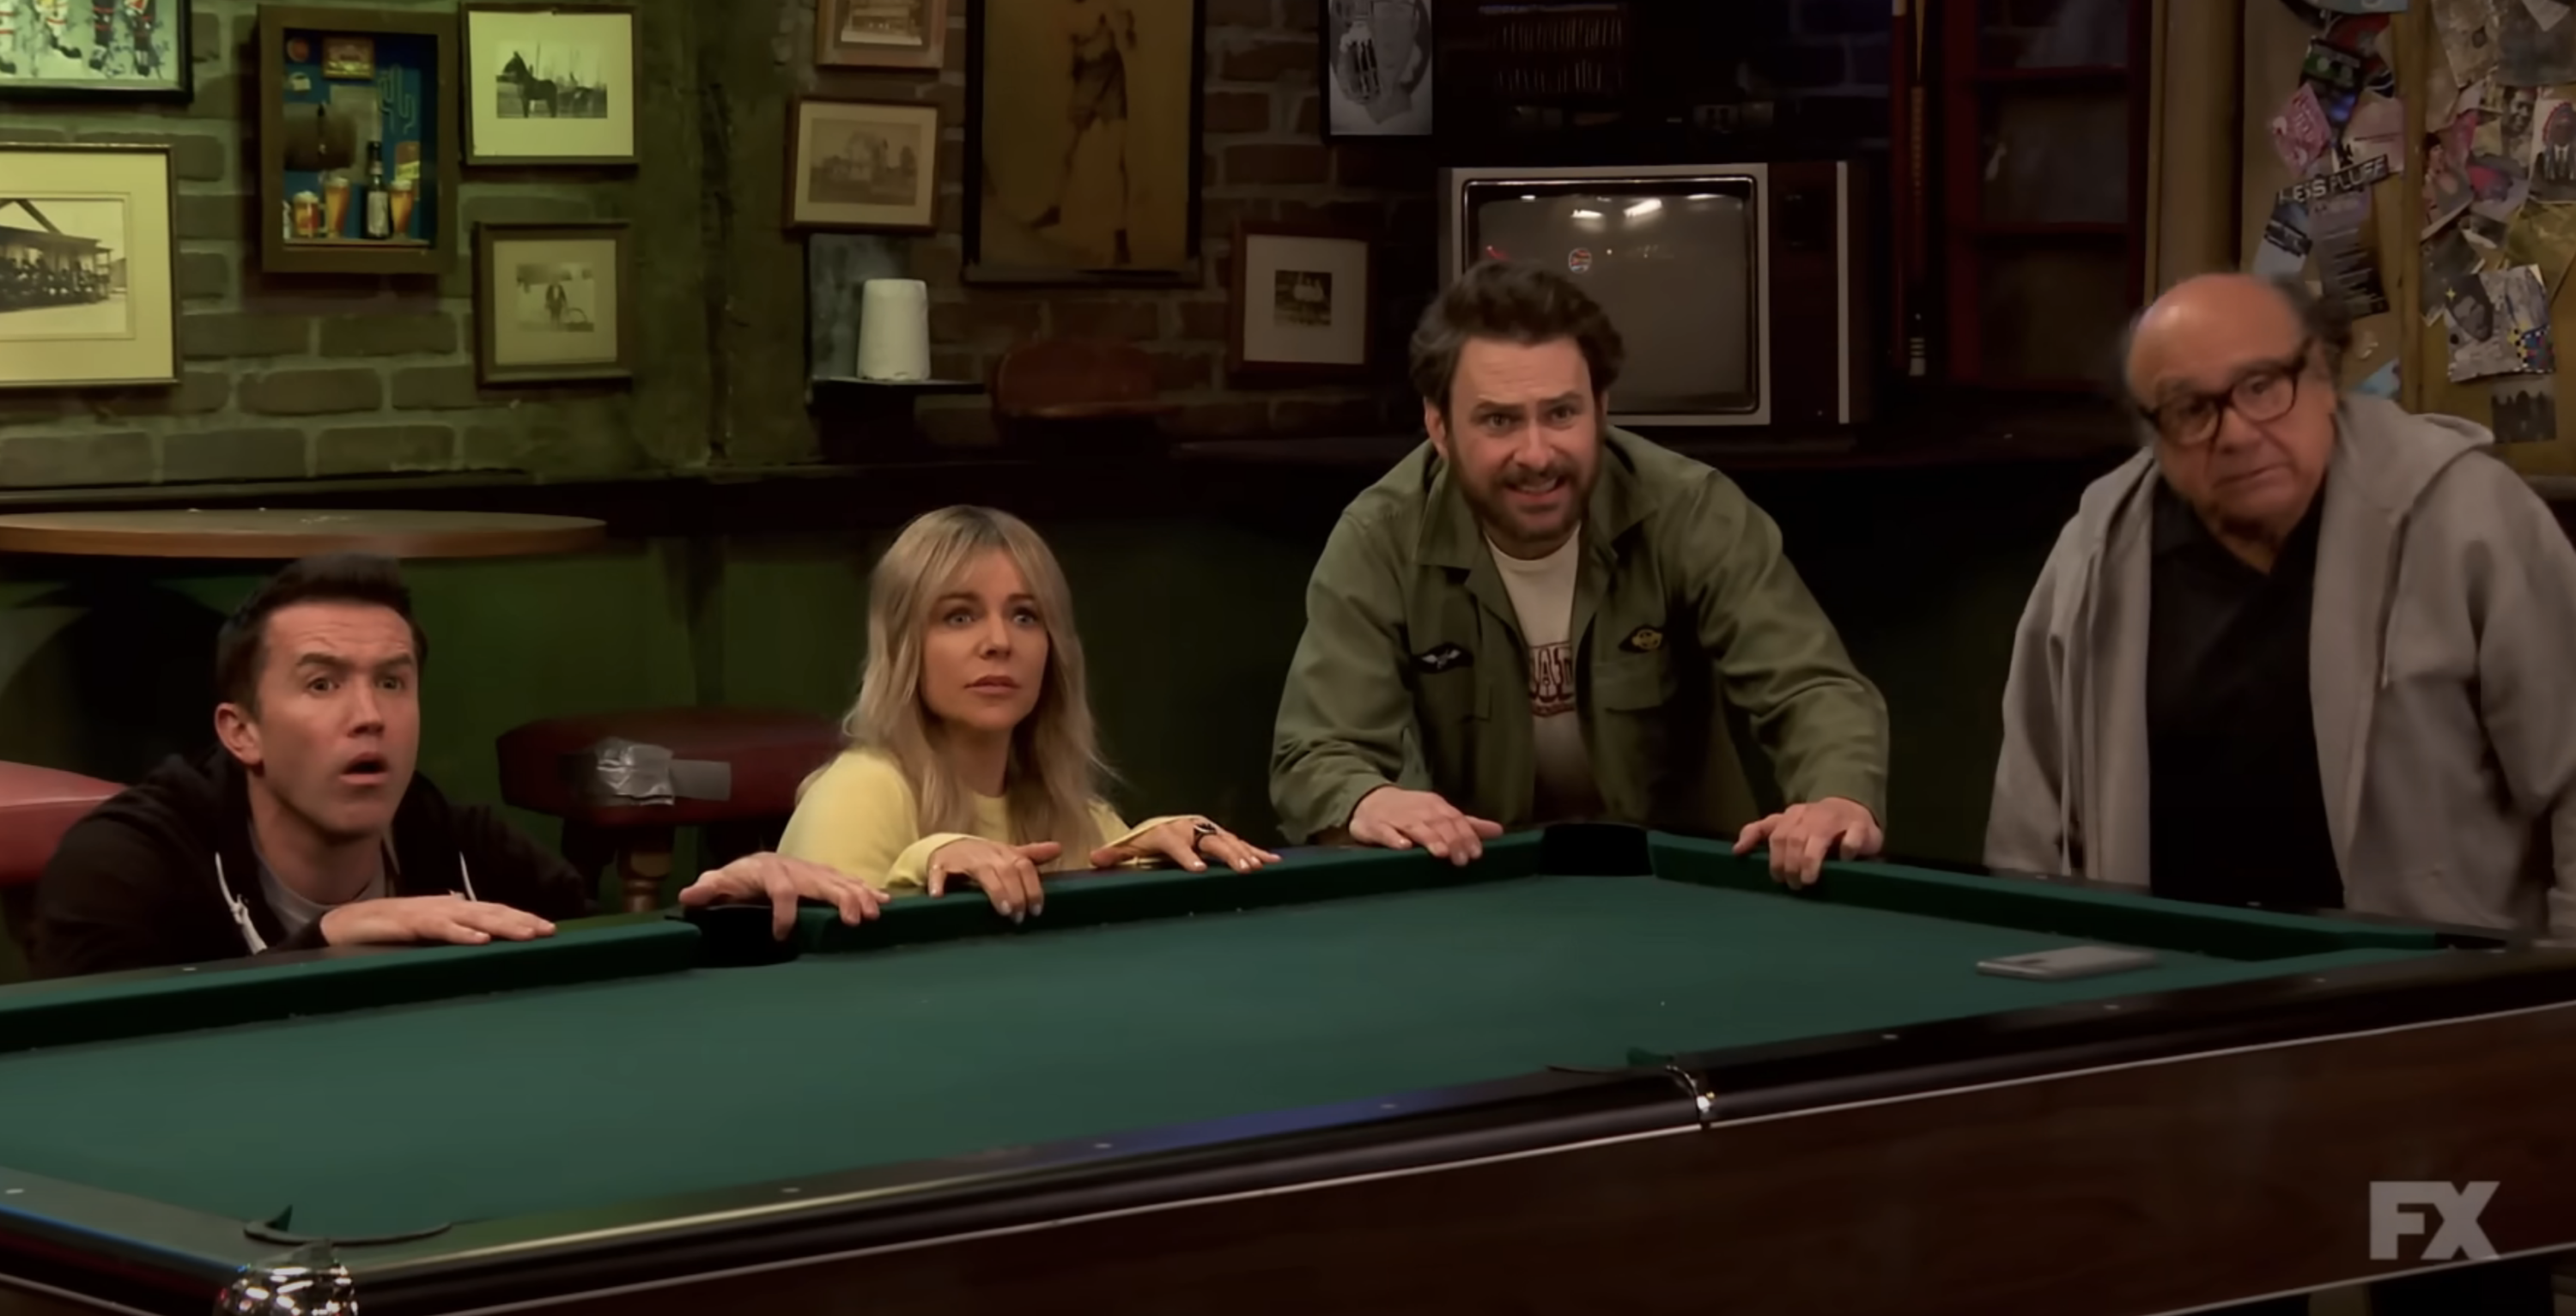 Four people standing or crouching around a pool table